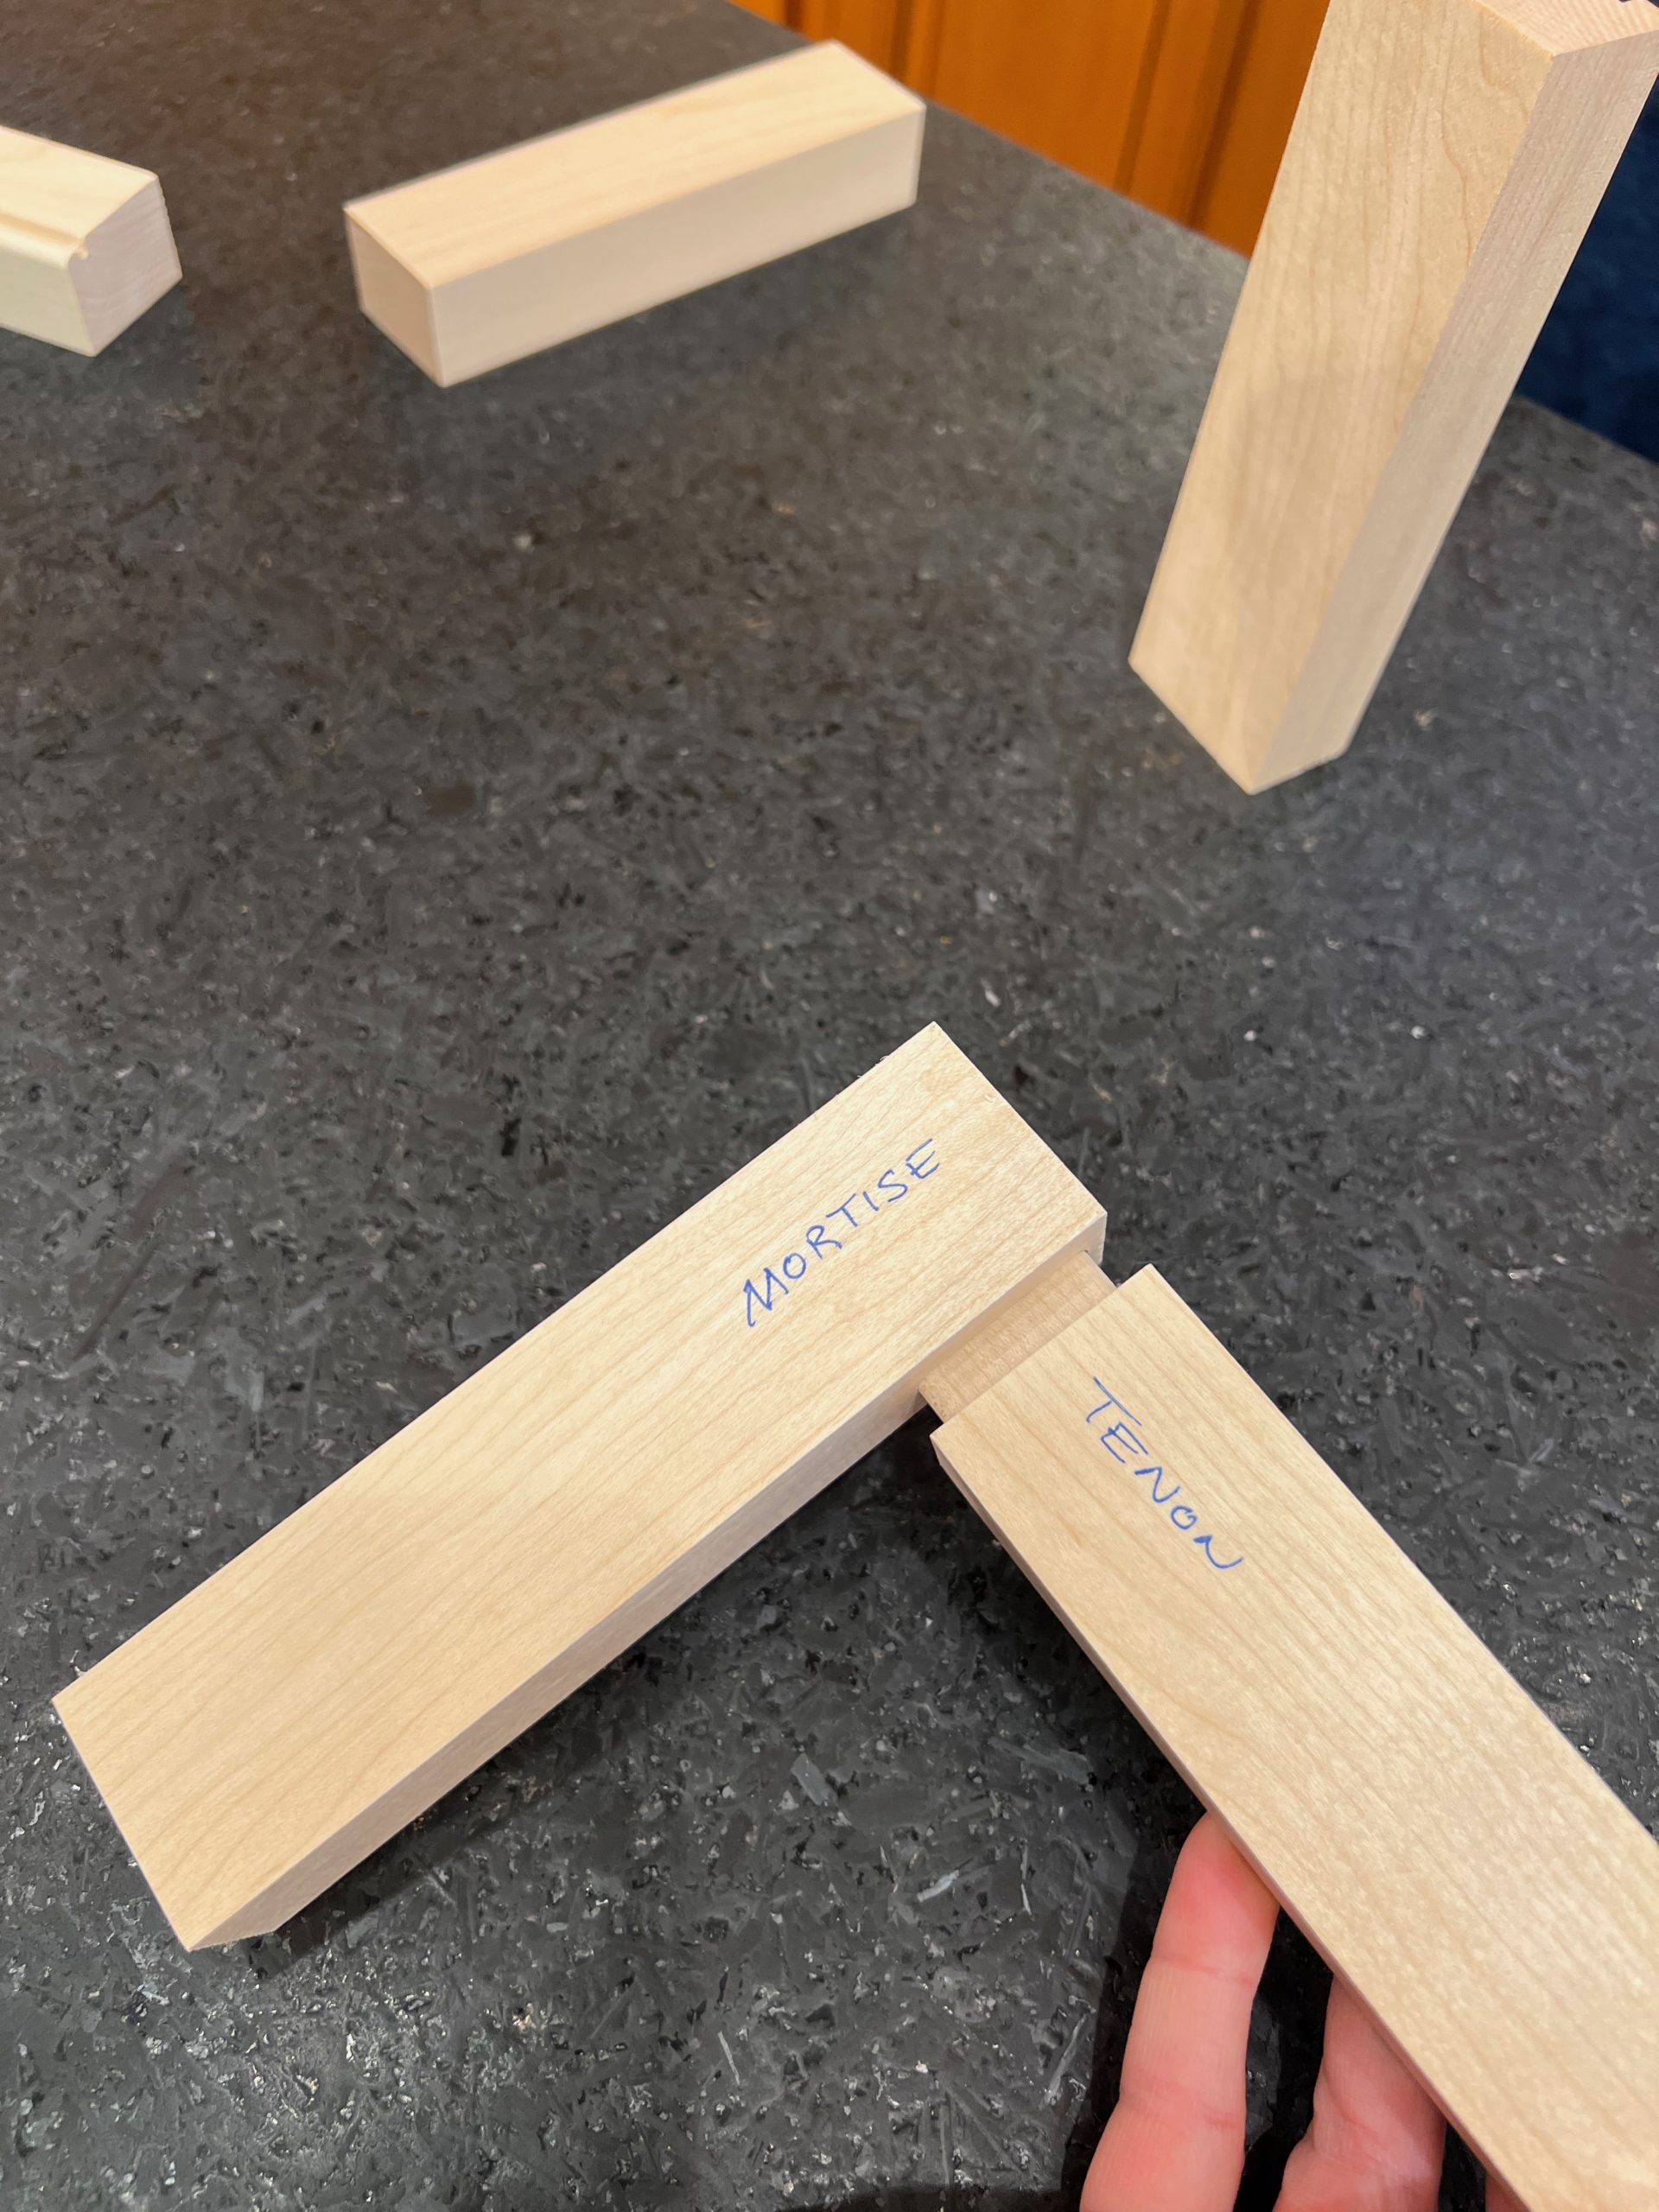 mortise and tenon joined together